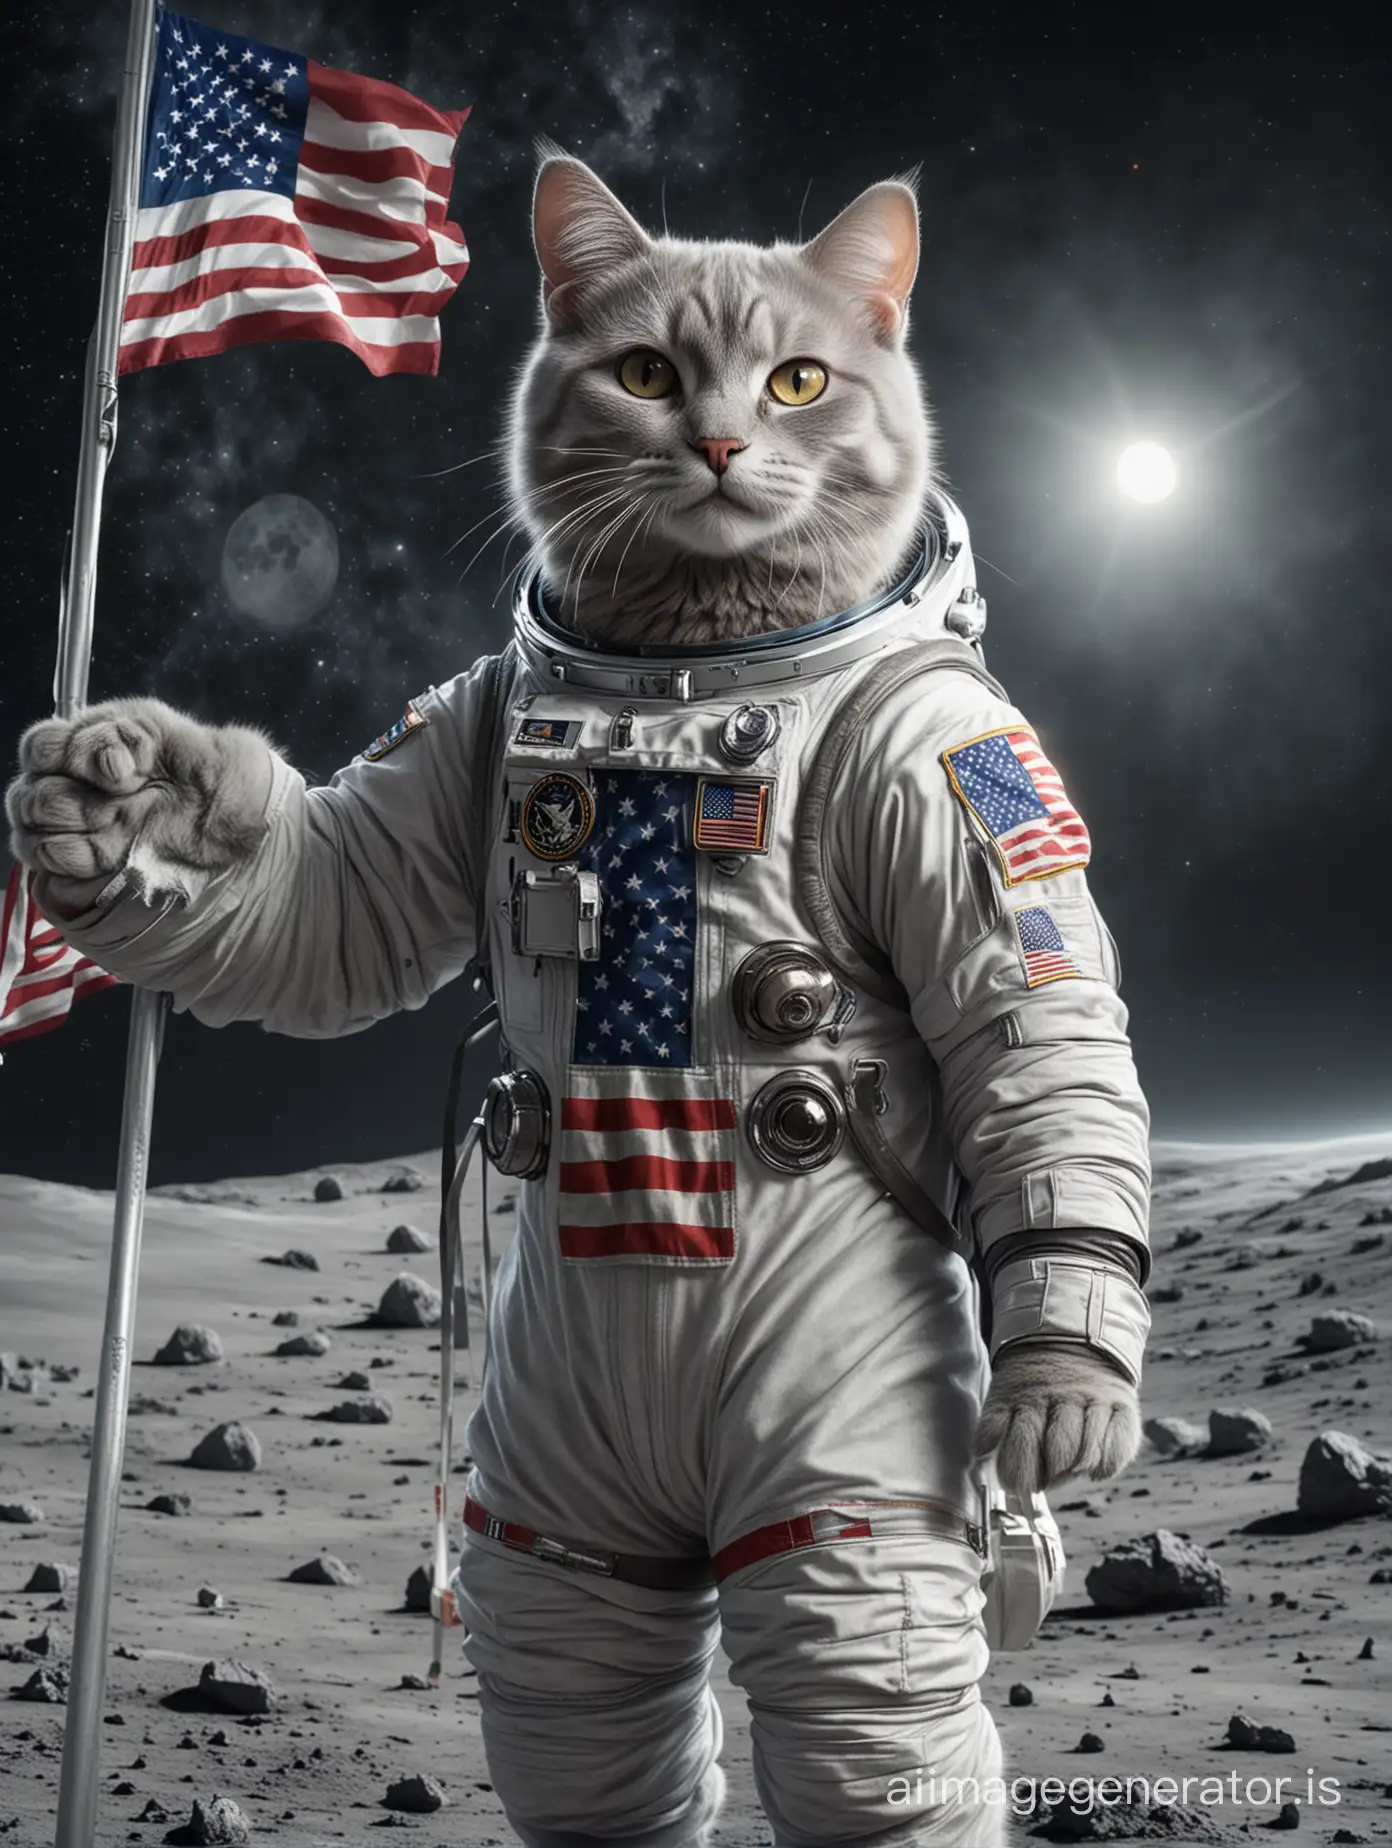 4k, ultra resolution, hd, realistic. Neill Armstrong style light grey cat with grey eyes in spacesuit raising an one American flag on the moon ground in space